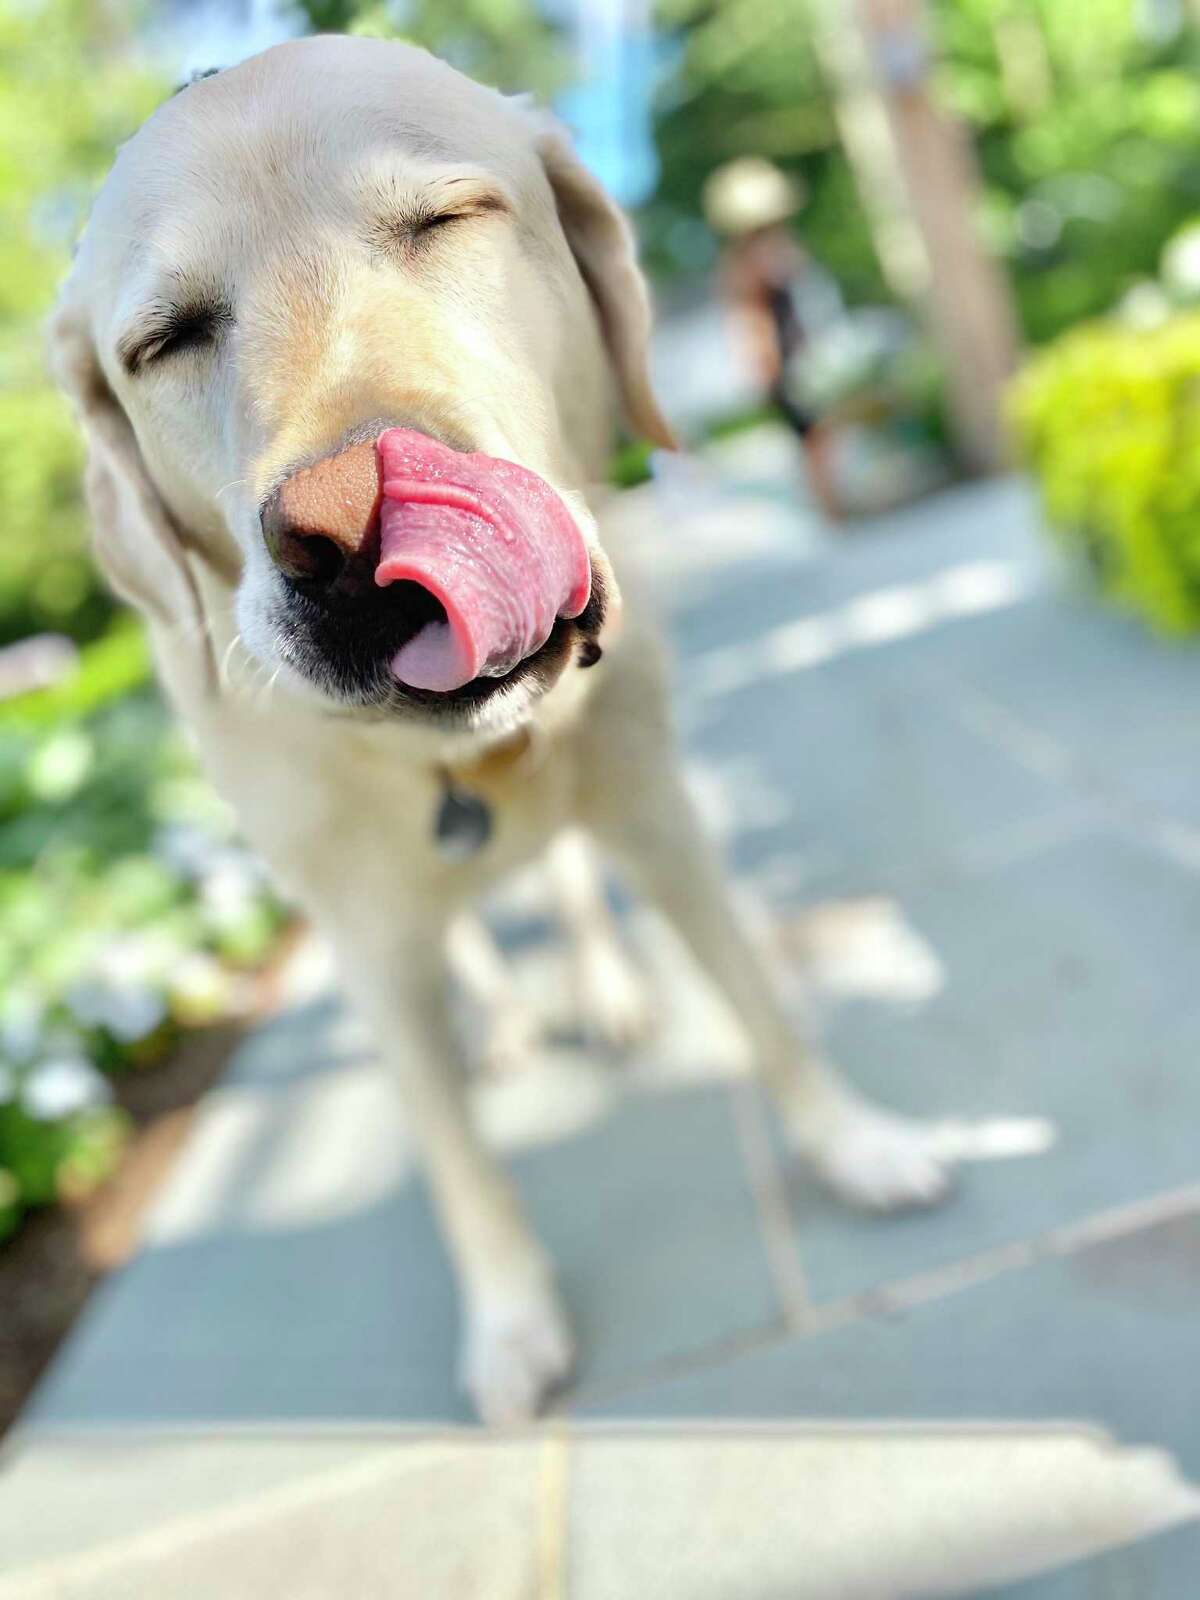 The Darien Arts Center’s seventh smartphone photo contest, Pic Darien, has returned and is welcoming entries. “Happy Dog,” above, by Josephine Andren is a top photo from last year’s contest.